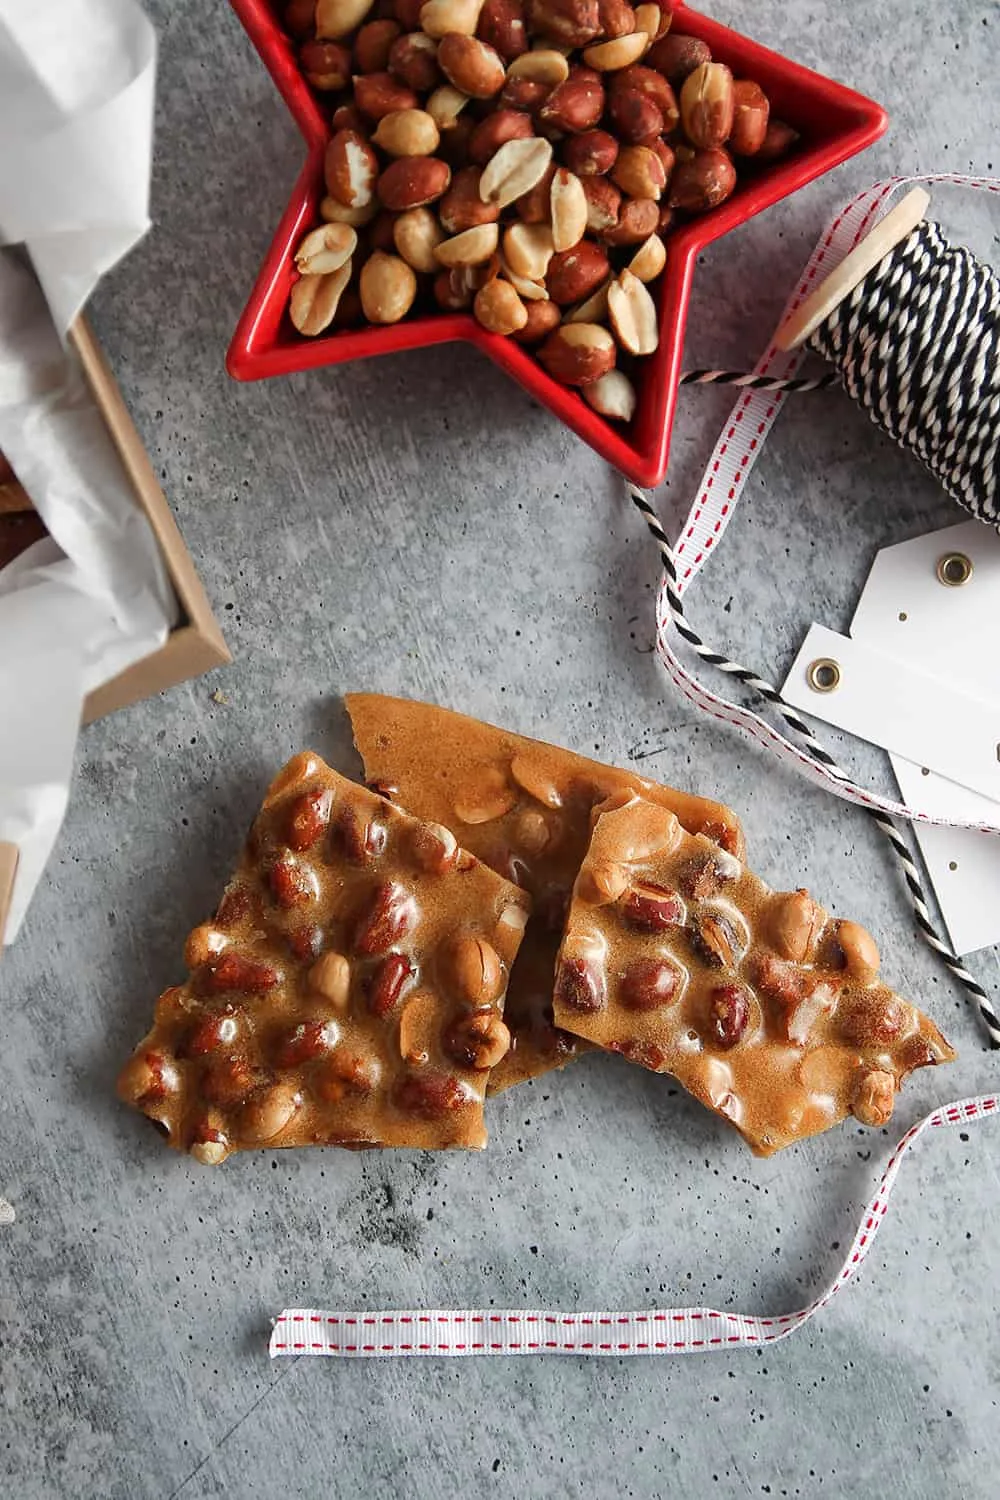 Homemade Peanut Brittle is a classic holiday candy that will become a family tradition